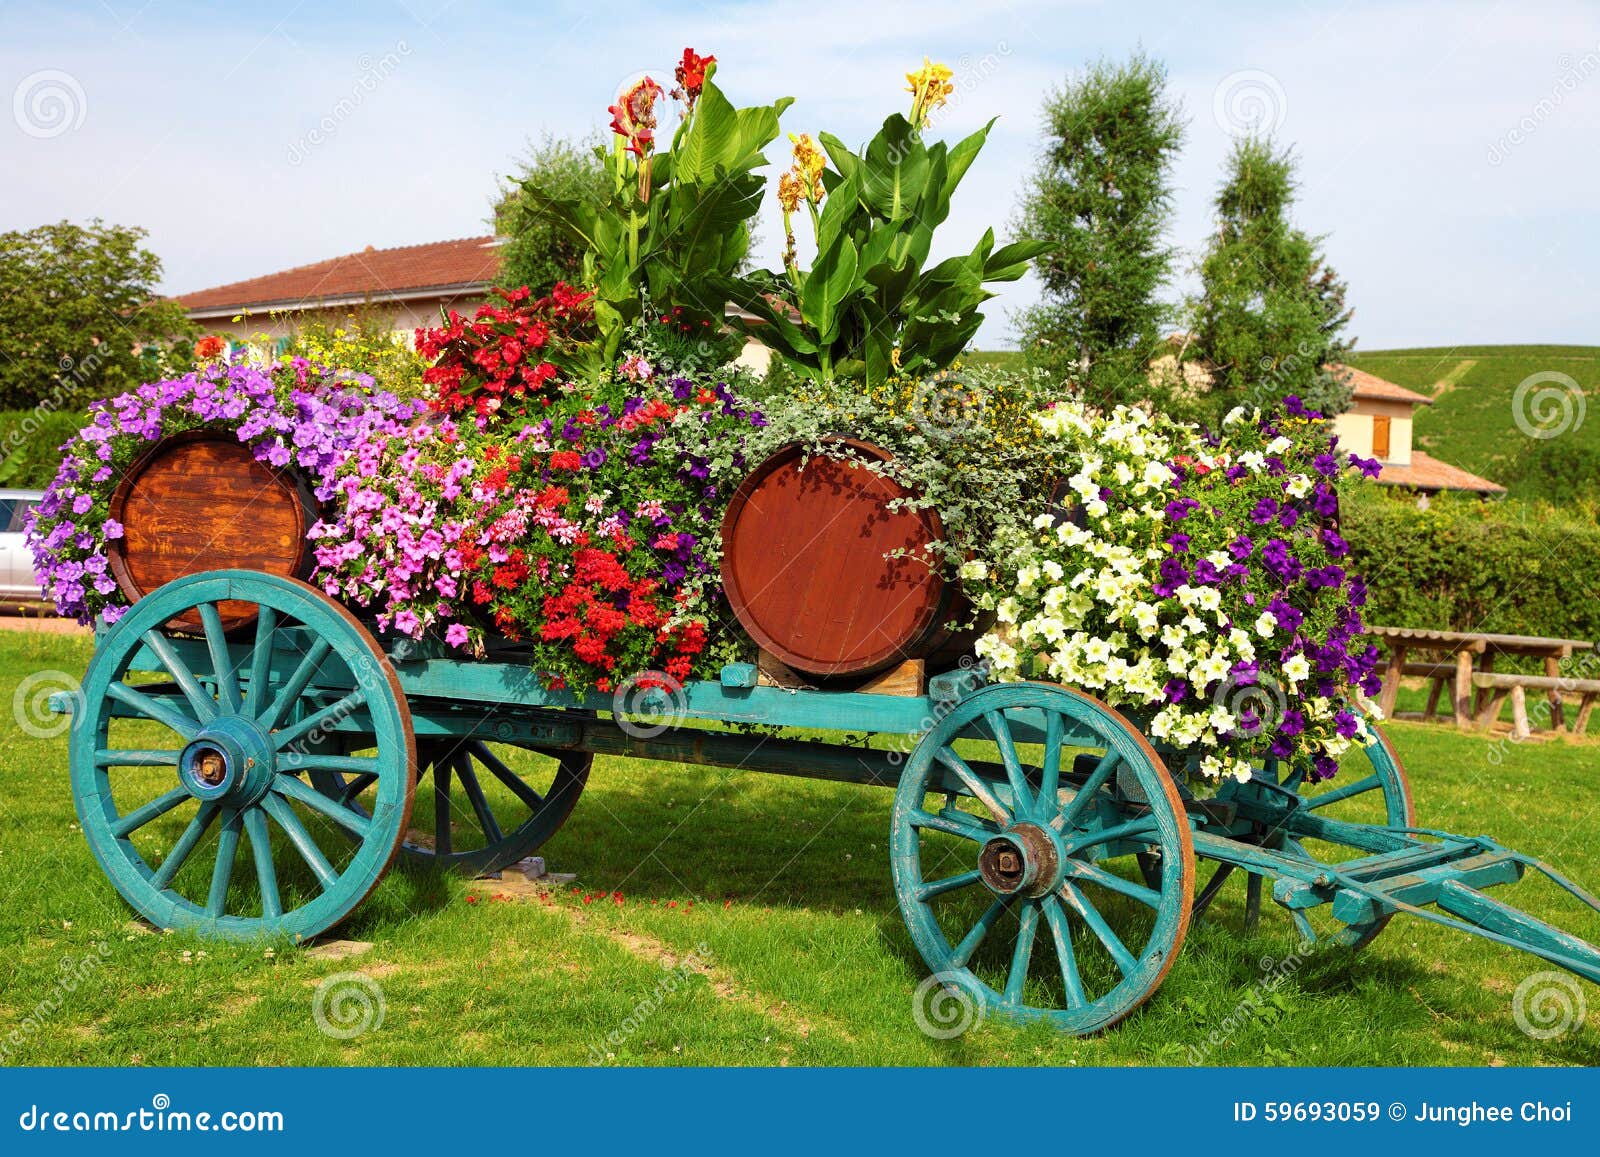 Flower decorated wine cart in Beaujolais region of France. Flower displayed wine cart in Beaujolais region of France